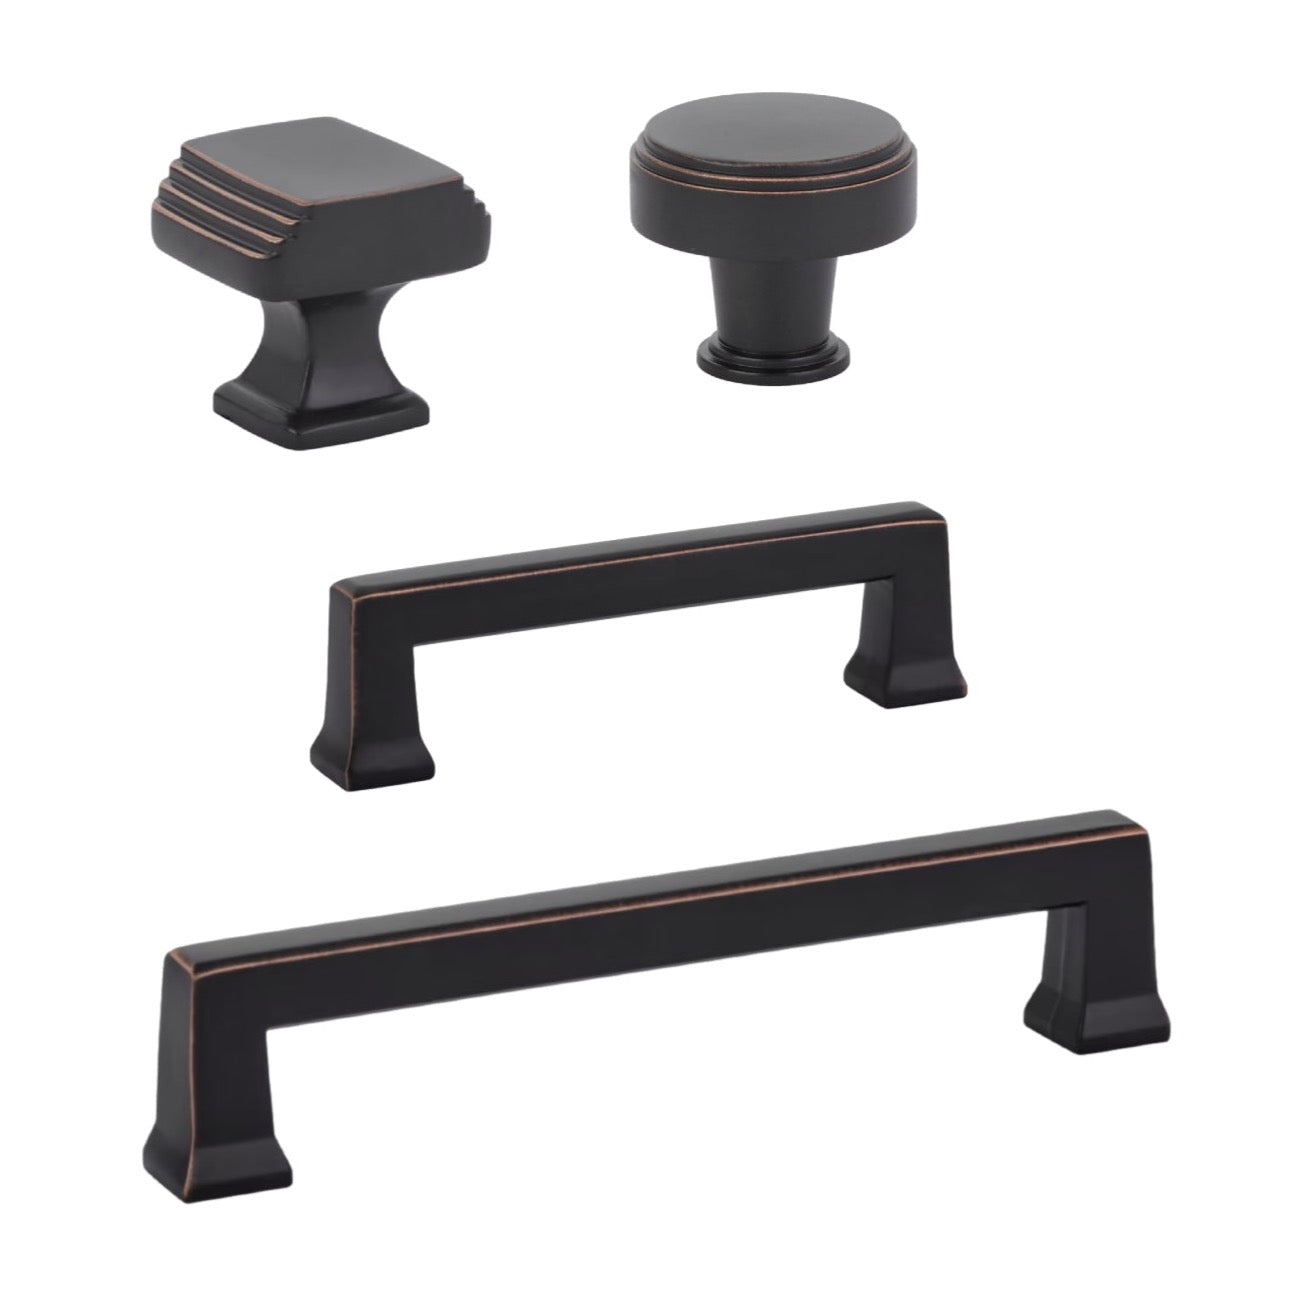 Oil Rubbed Bronze "Deco" Cabinet Knobs and Drawer Pulls - Forge Hardware Studio